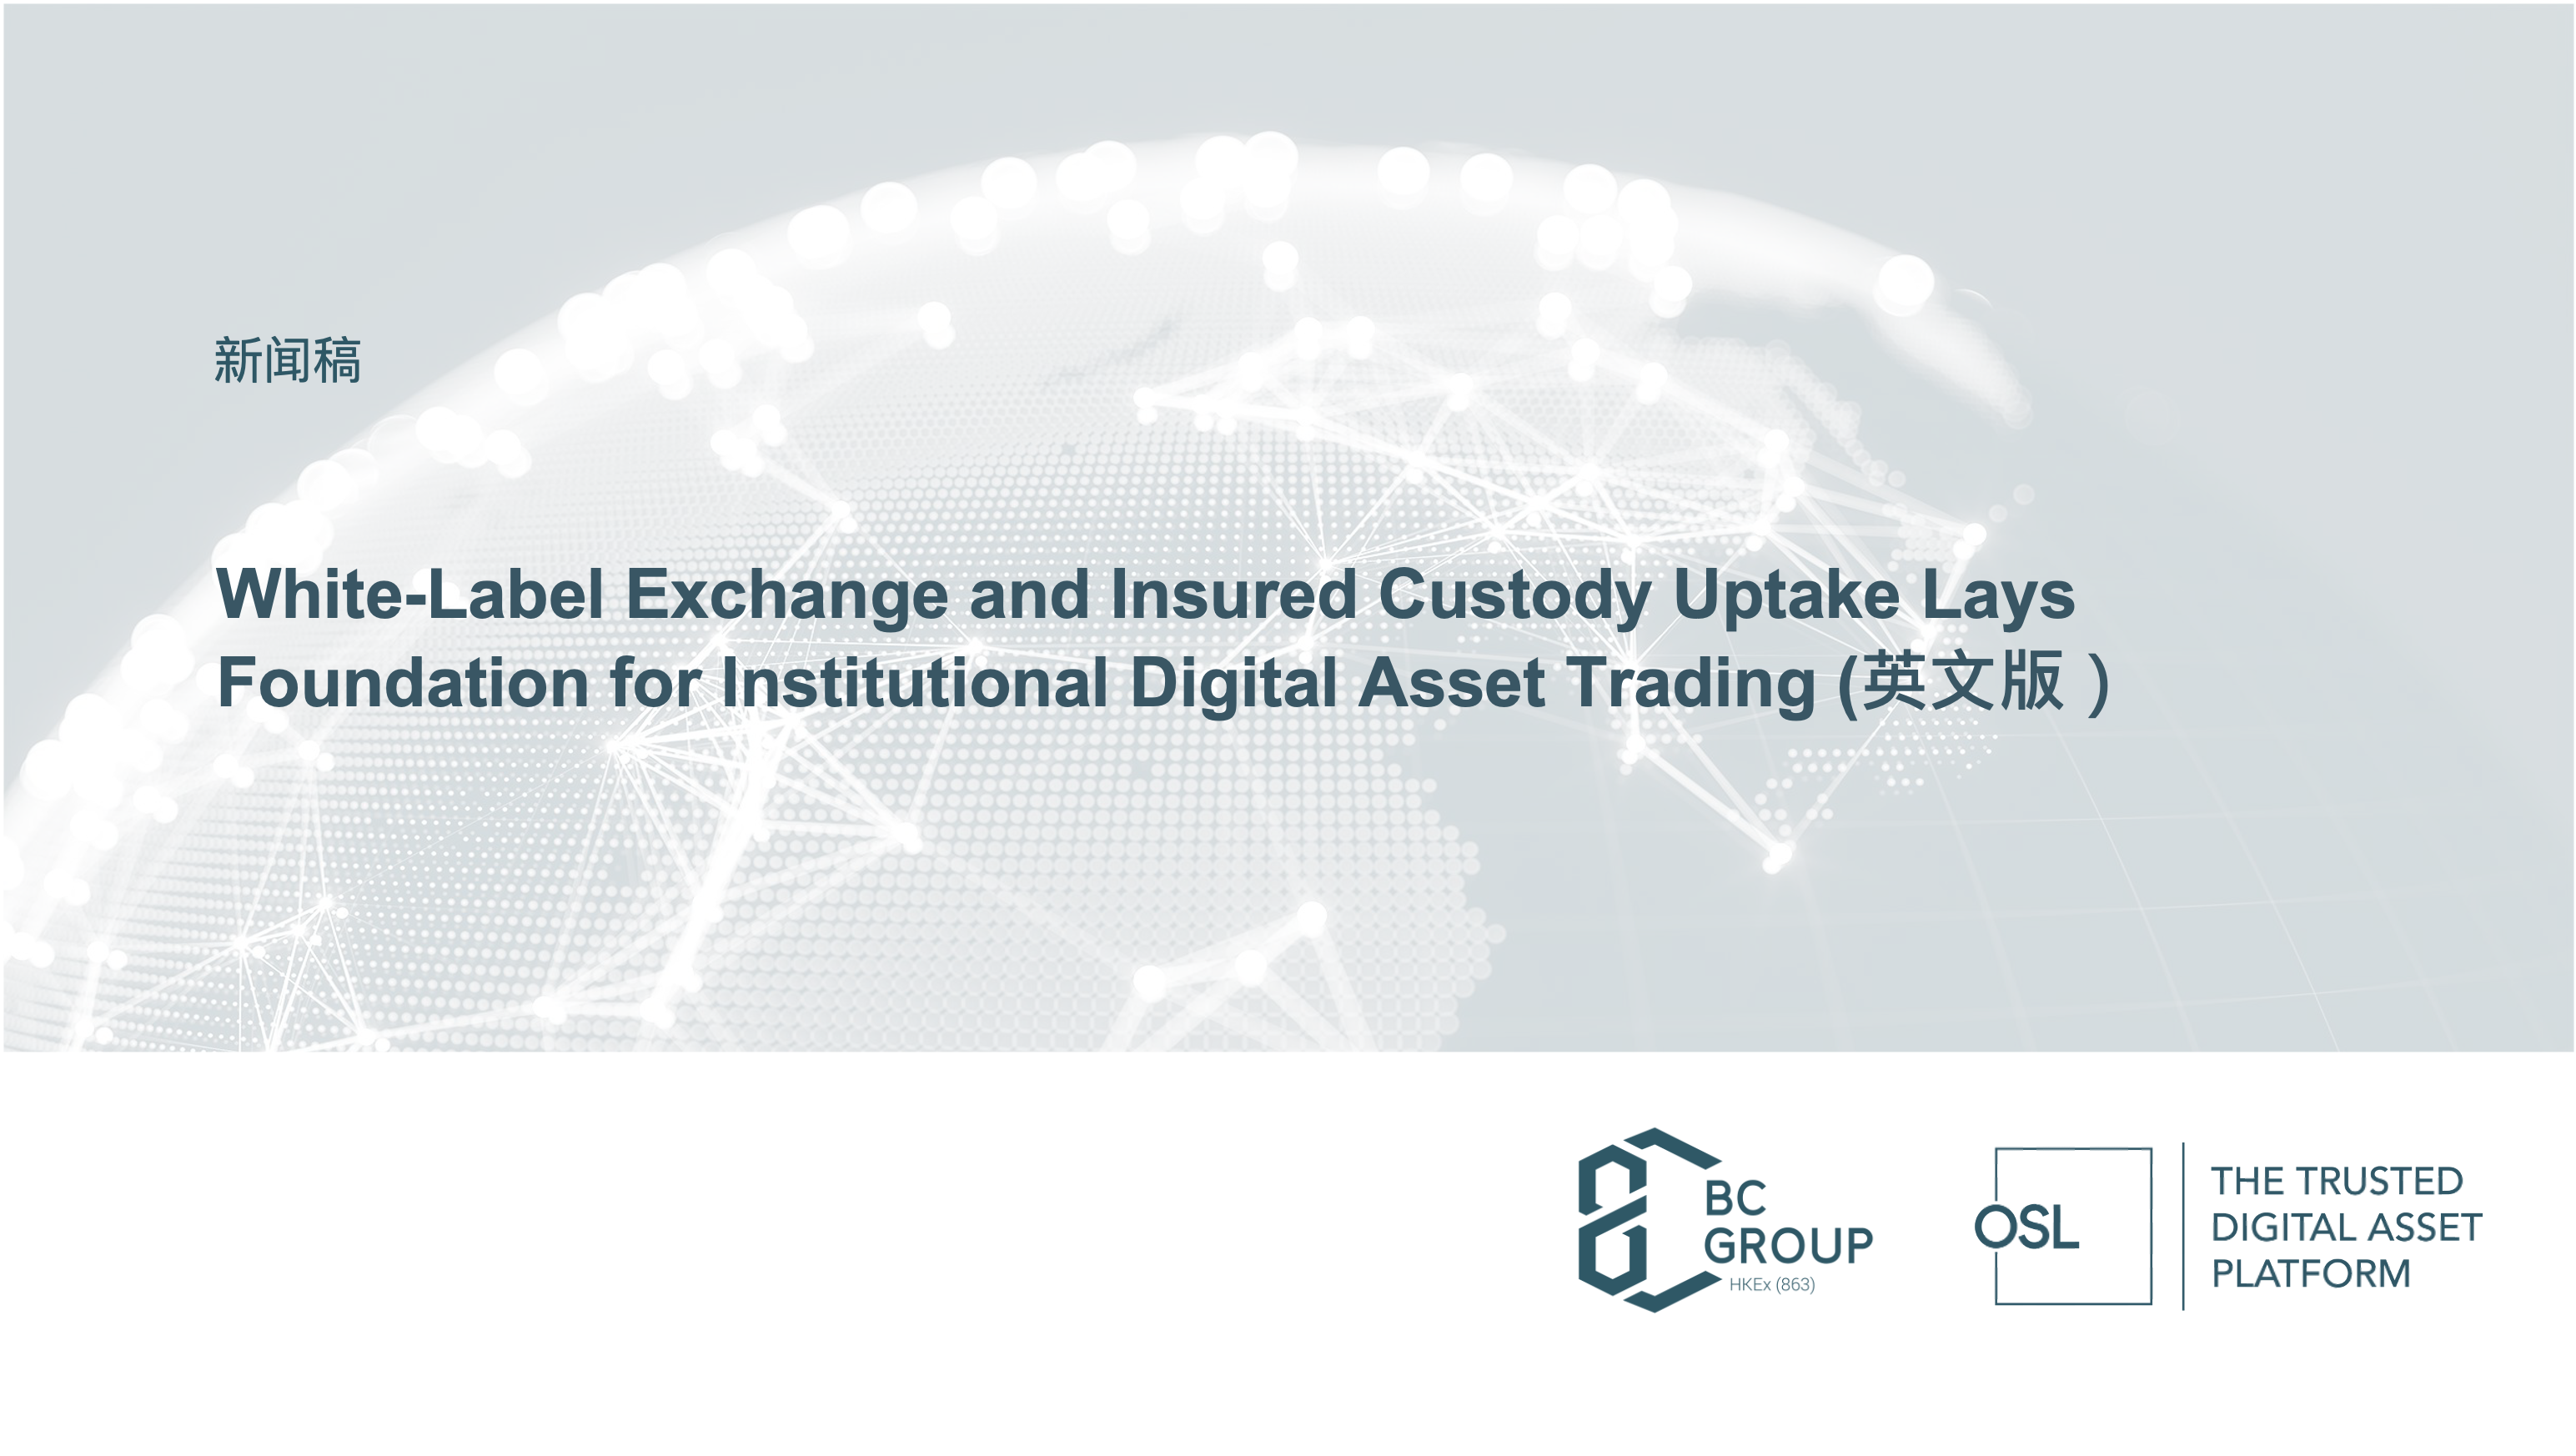 White-Label Exchange and Insured Custody Uptake Lays Foundation for Institutional Digital Asset Trading